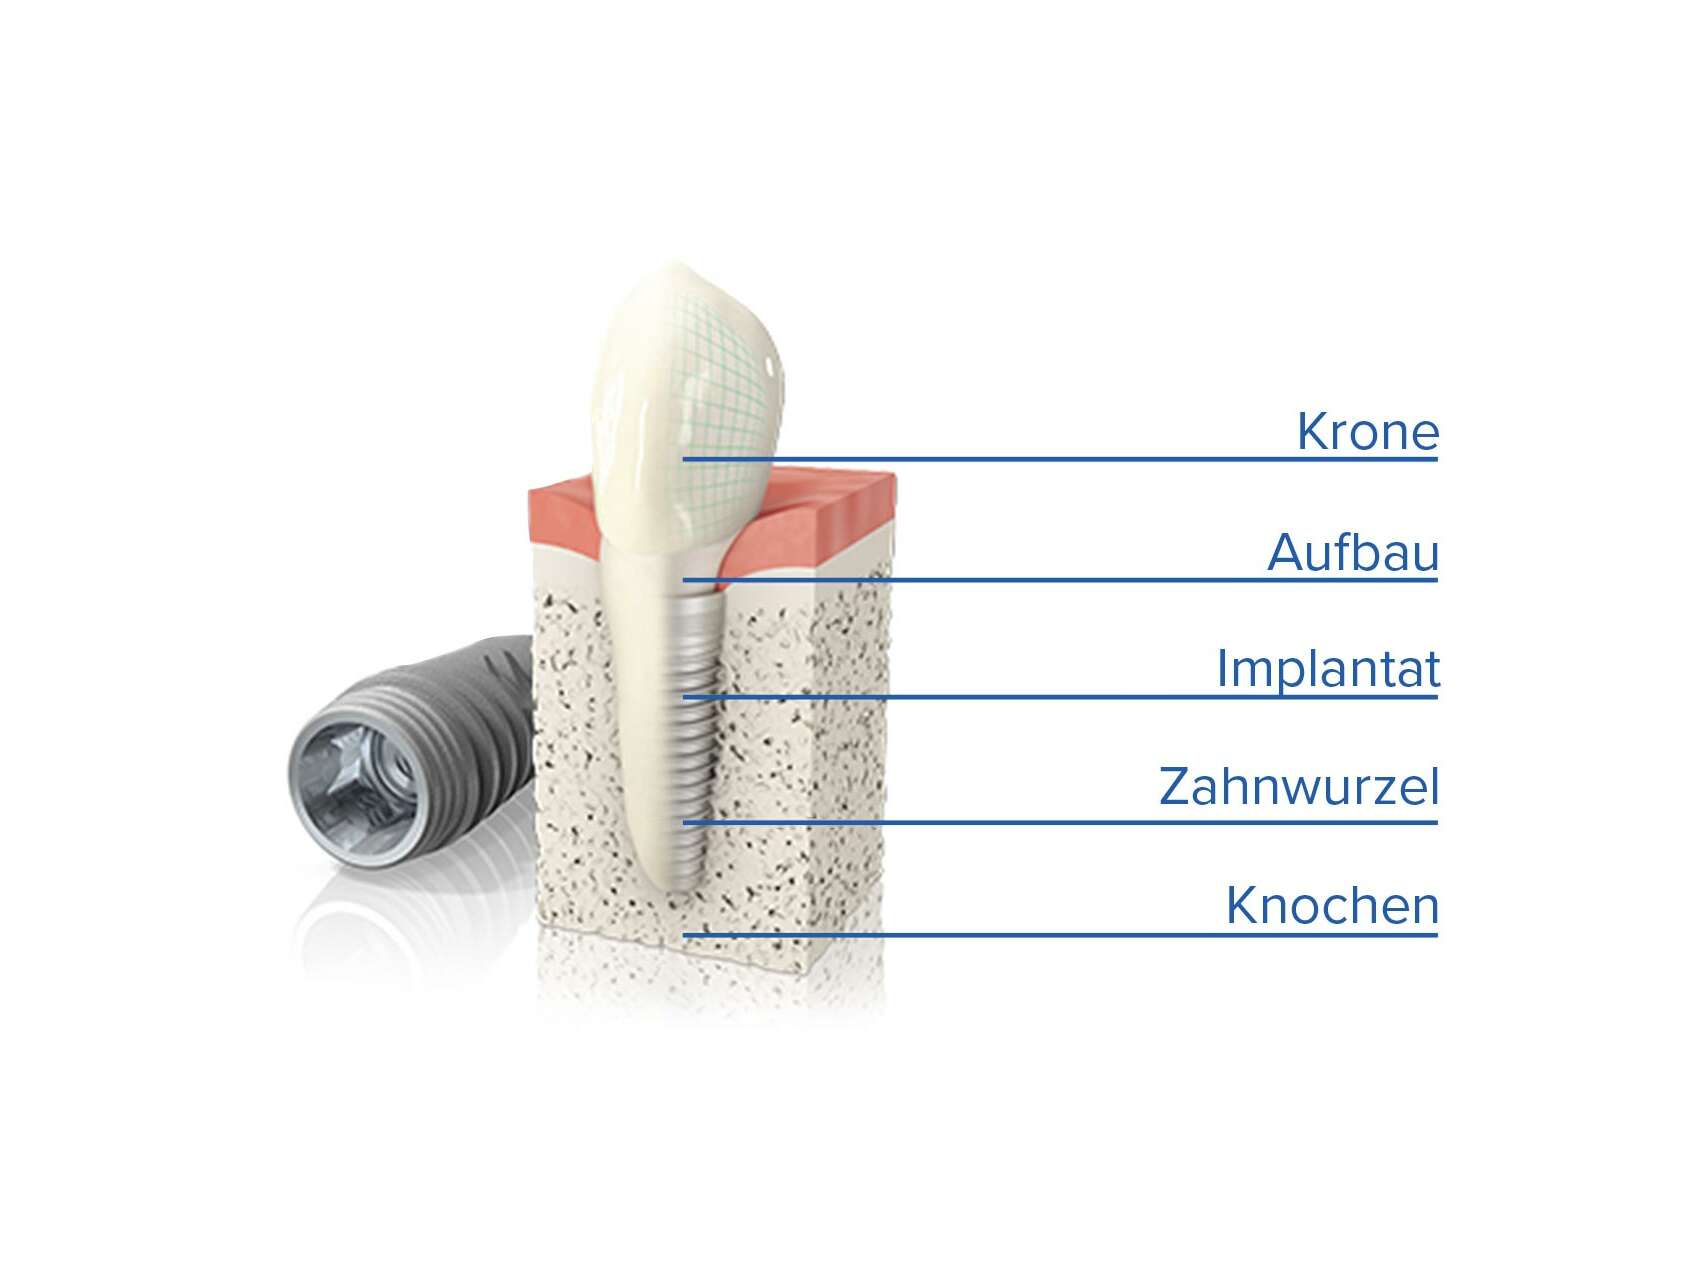 Insertion of a dental implant from bottom to top: Bone, tooth root, implant, abutment, crown